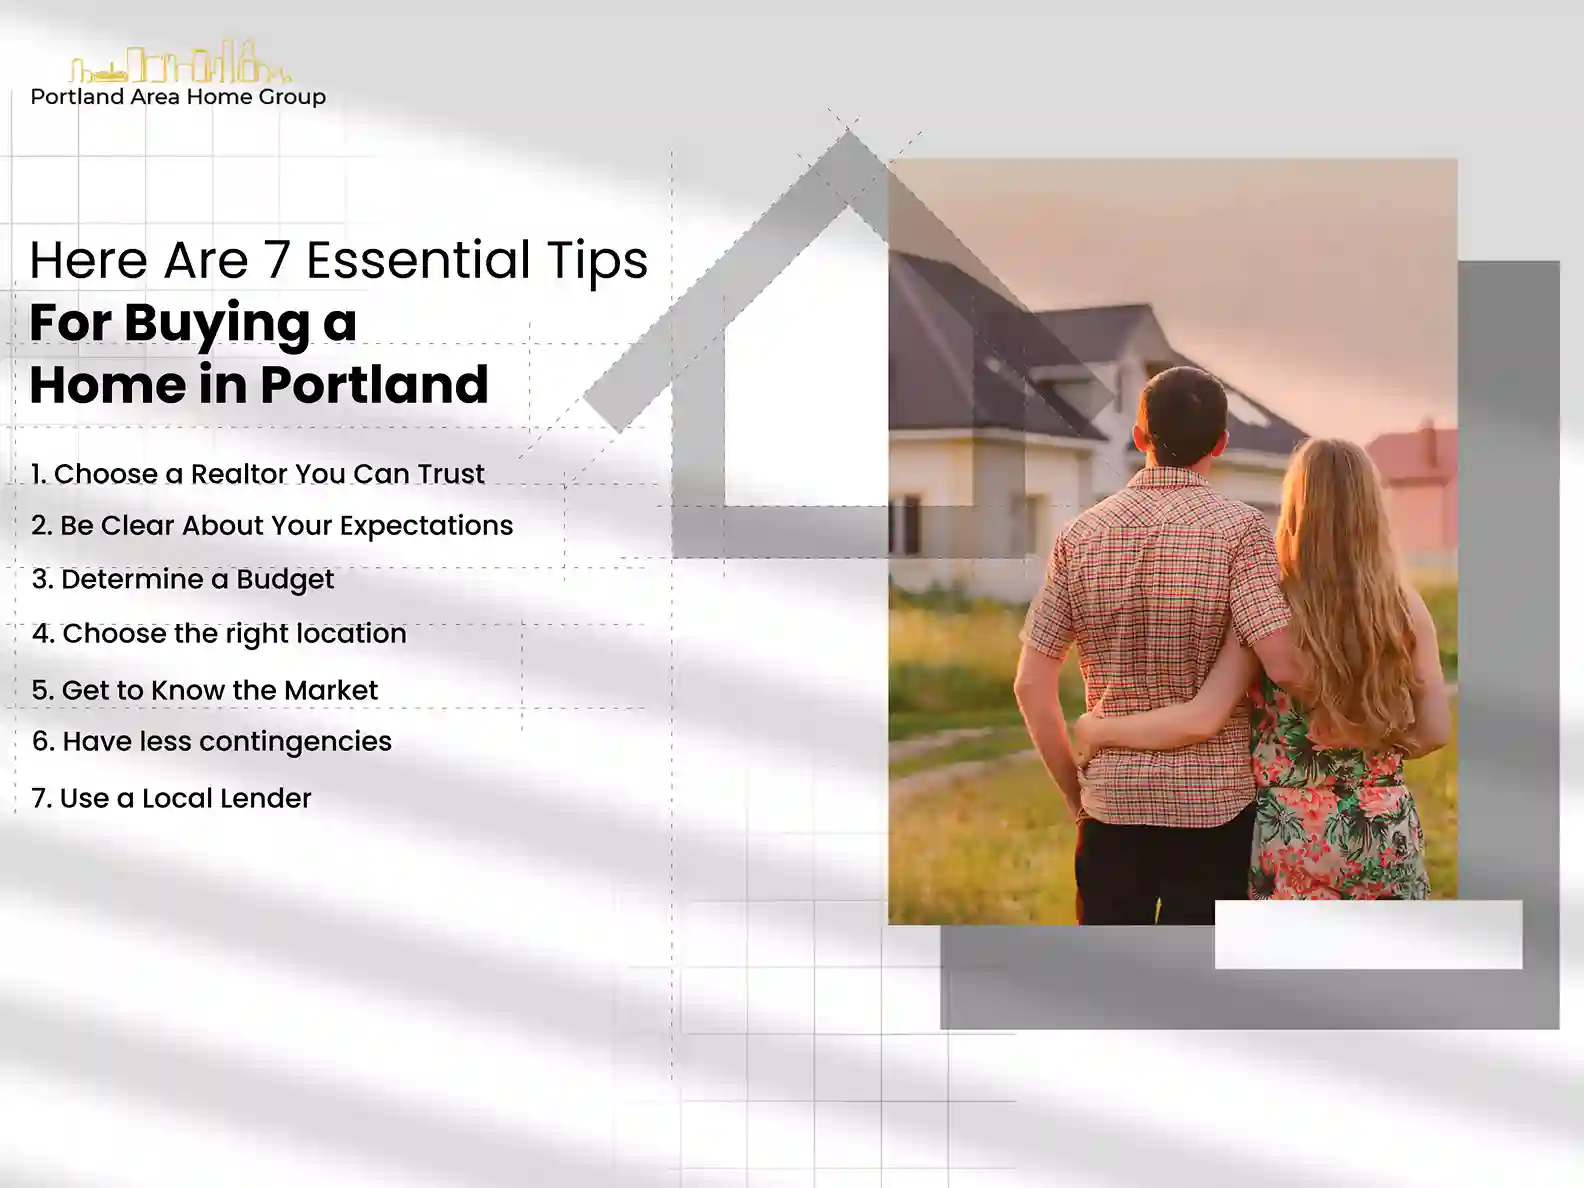 Here Are 7 Essential Tips for Buying a Home in Portland